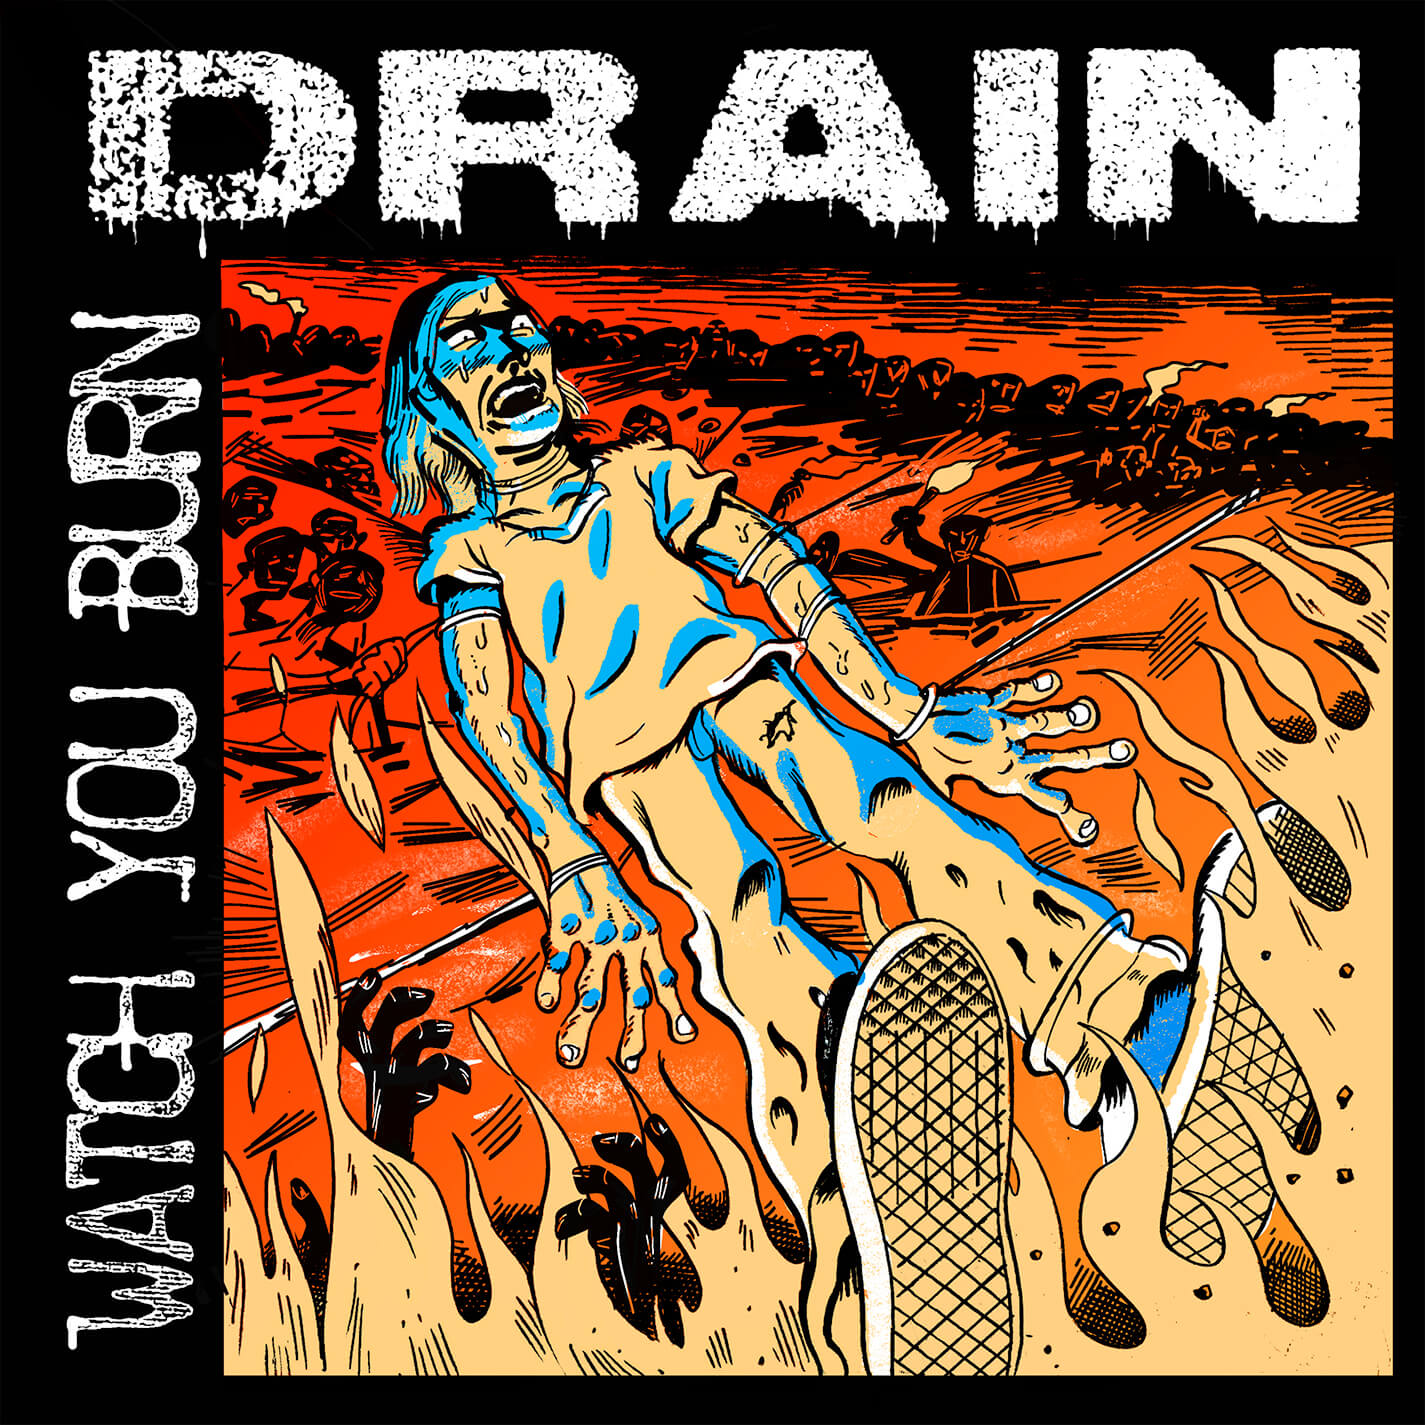 Santa Cruz band Drain have signed to legendary punk/hardcore label Epitaph Records. Along with the news, the band have shared Watch You Burn